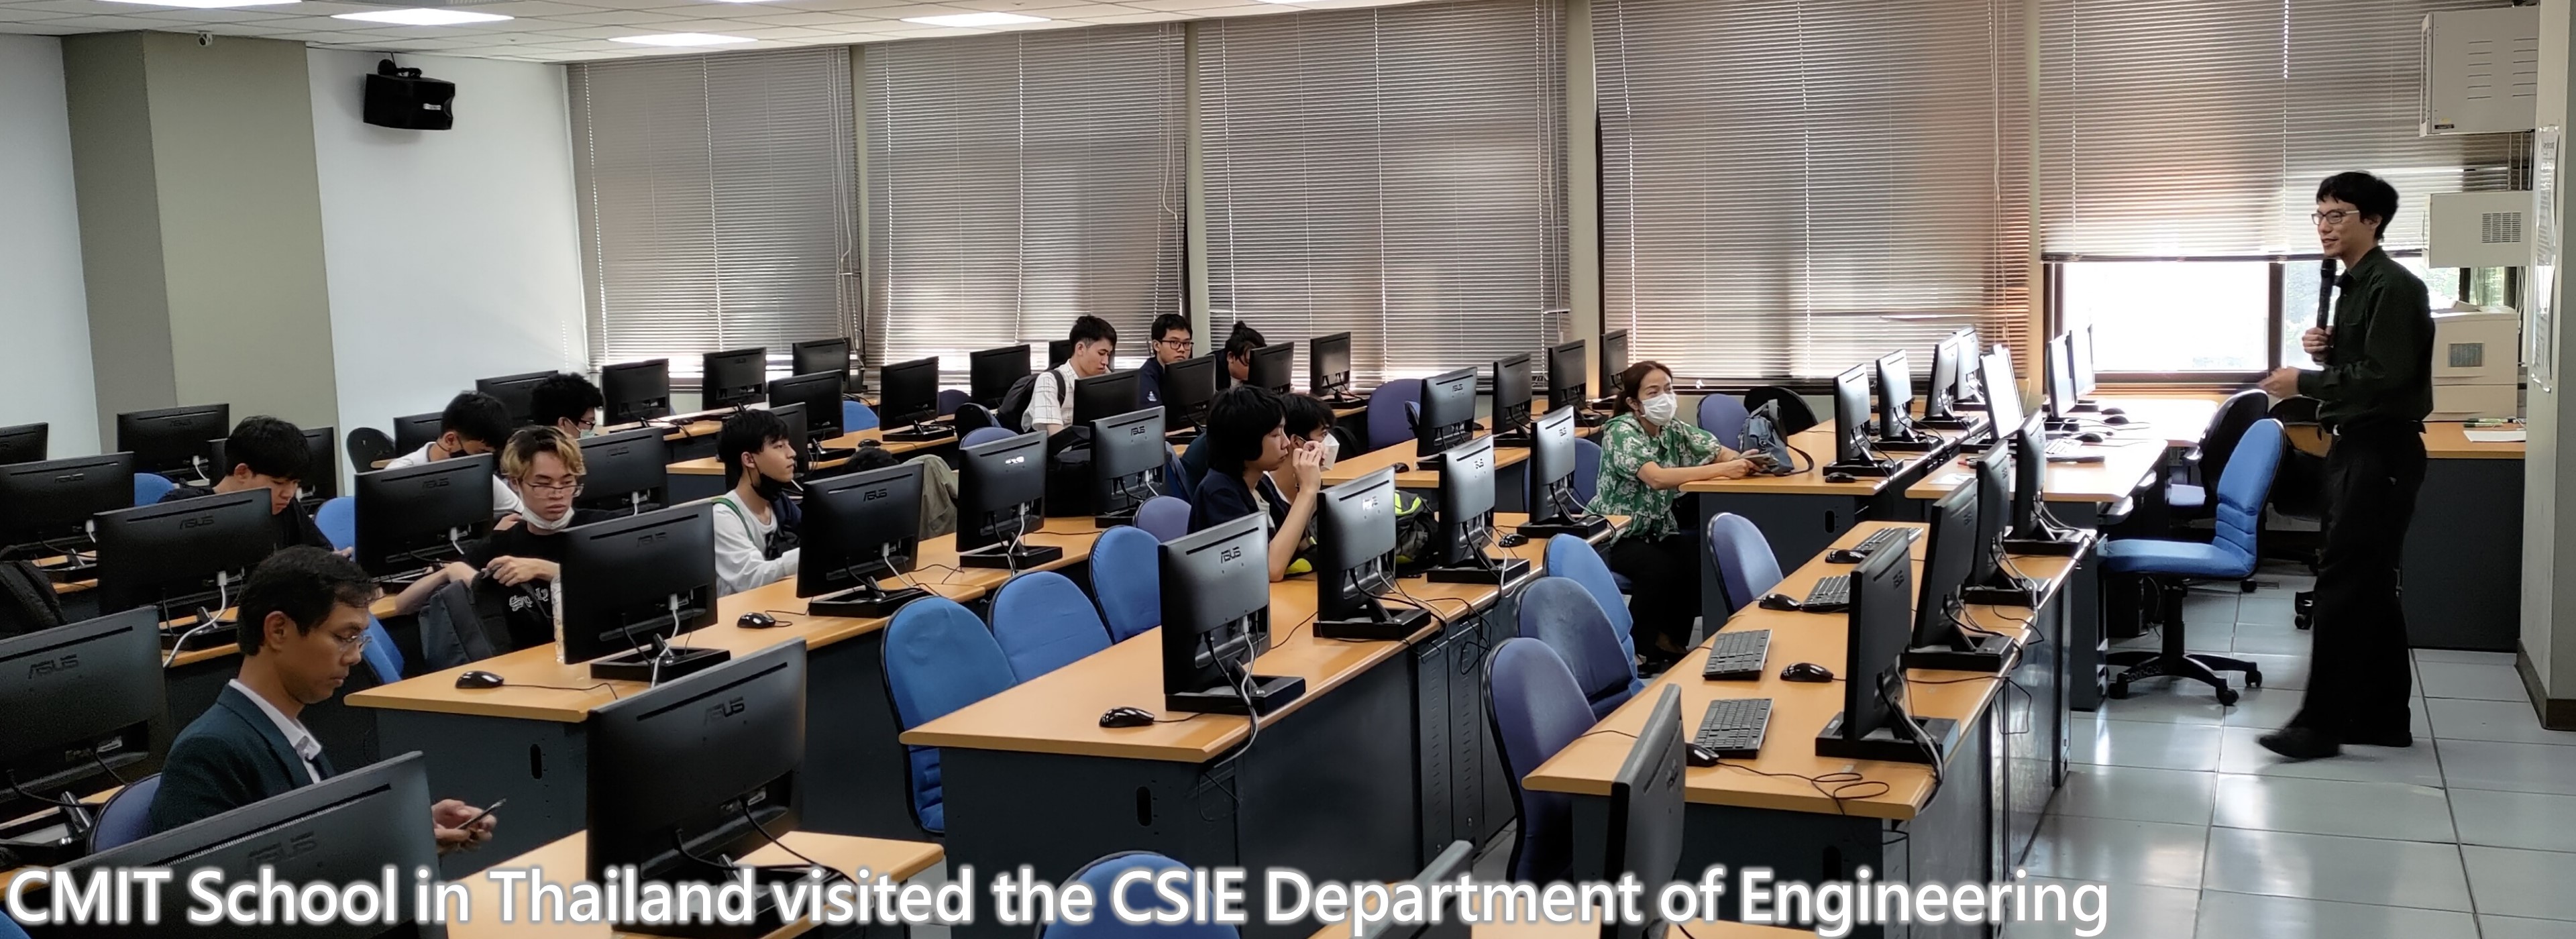 CMIT School in Thailand visited the CSIE Department of Engineering